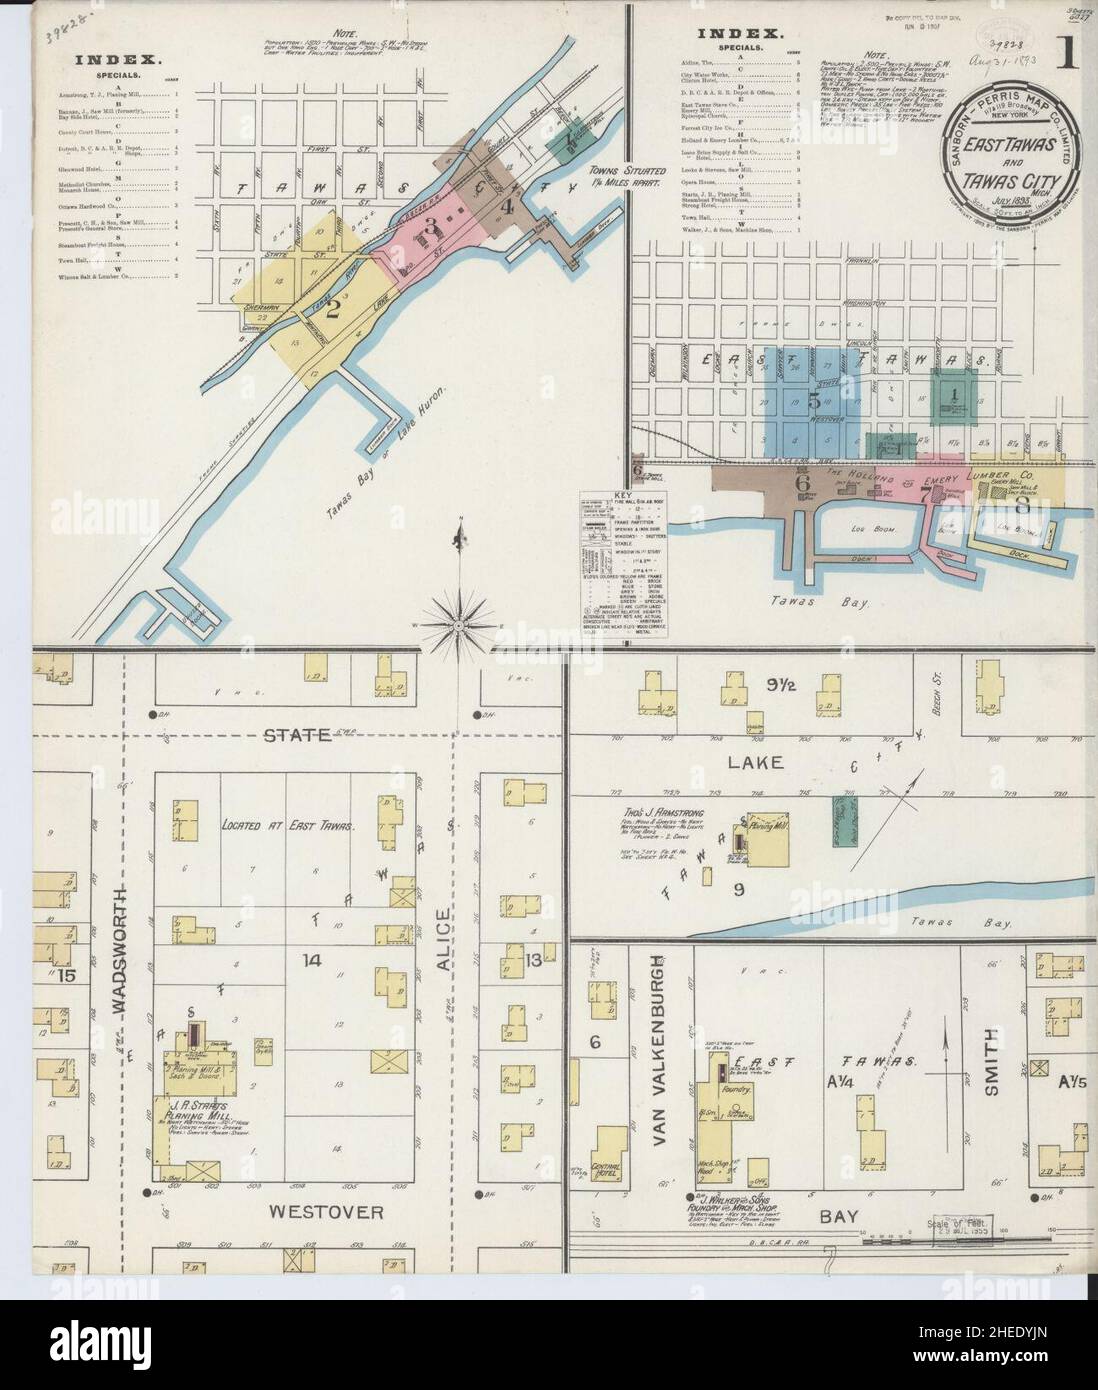 Sanborn Fire Insurance Map from East Tawas, IOSCO County, Michigan. Foto Stock